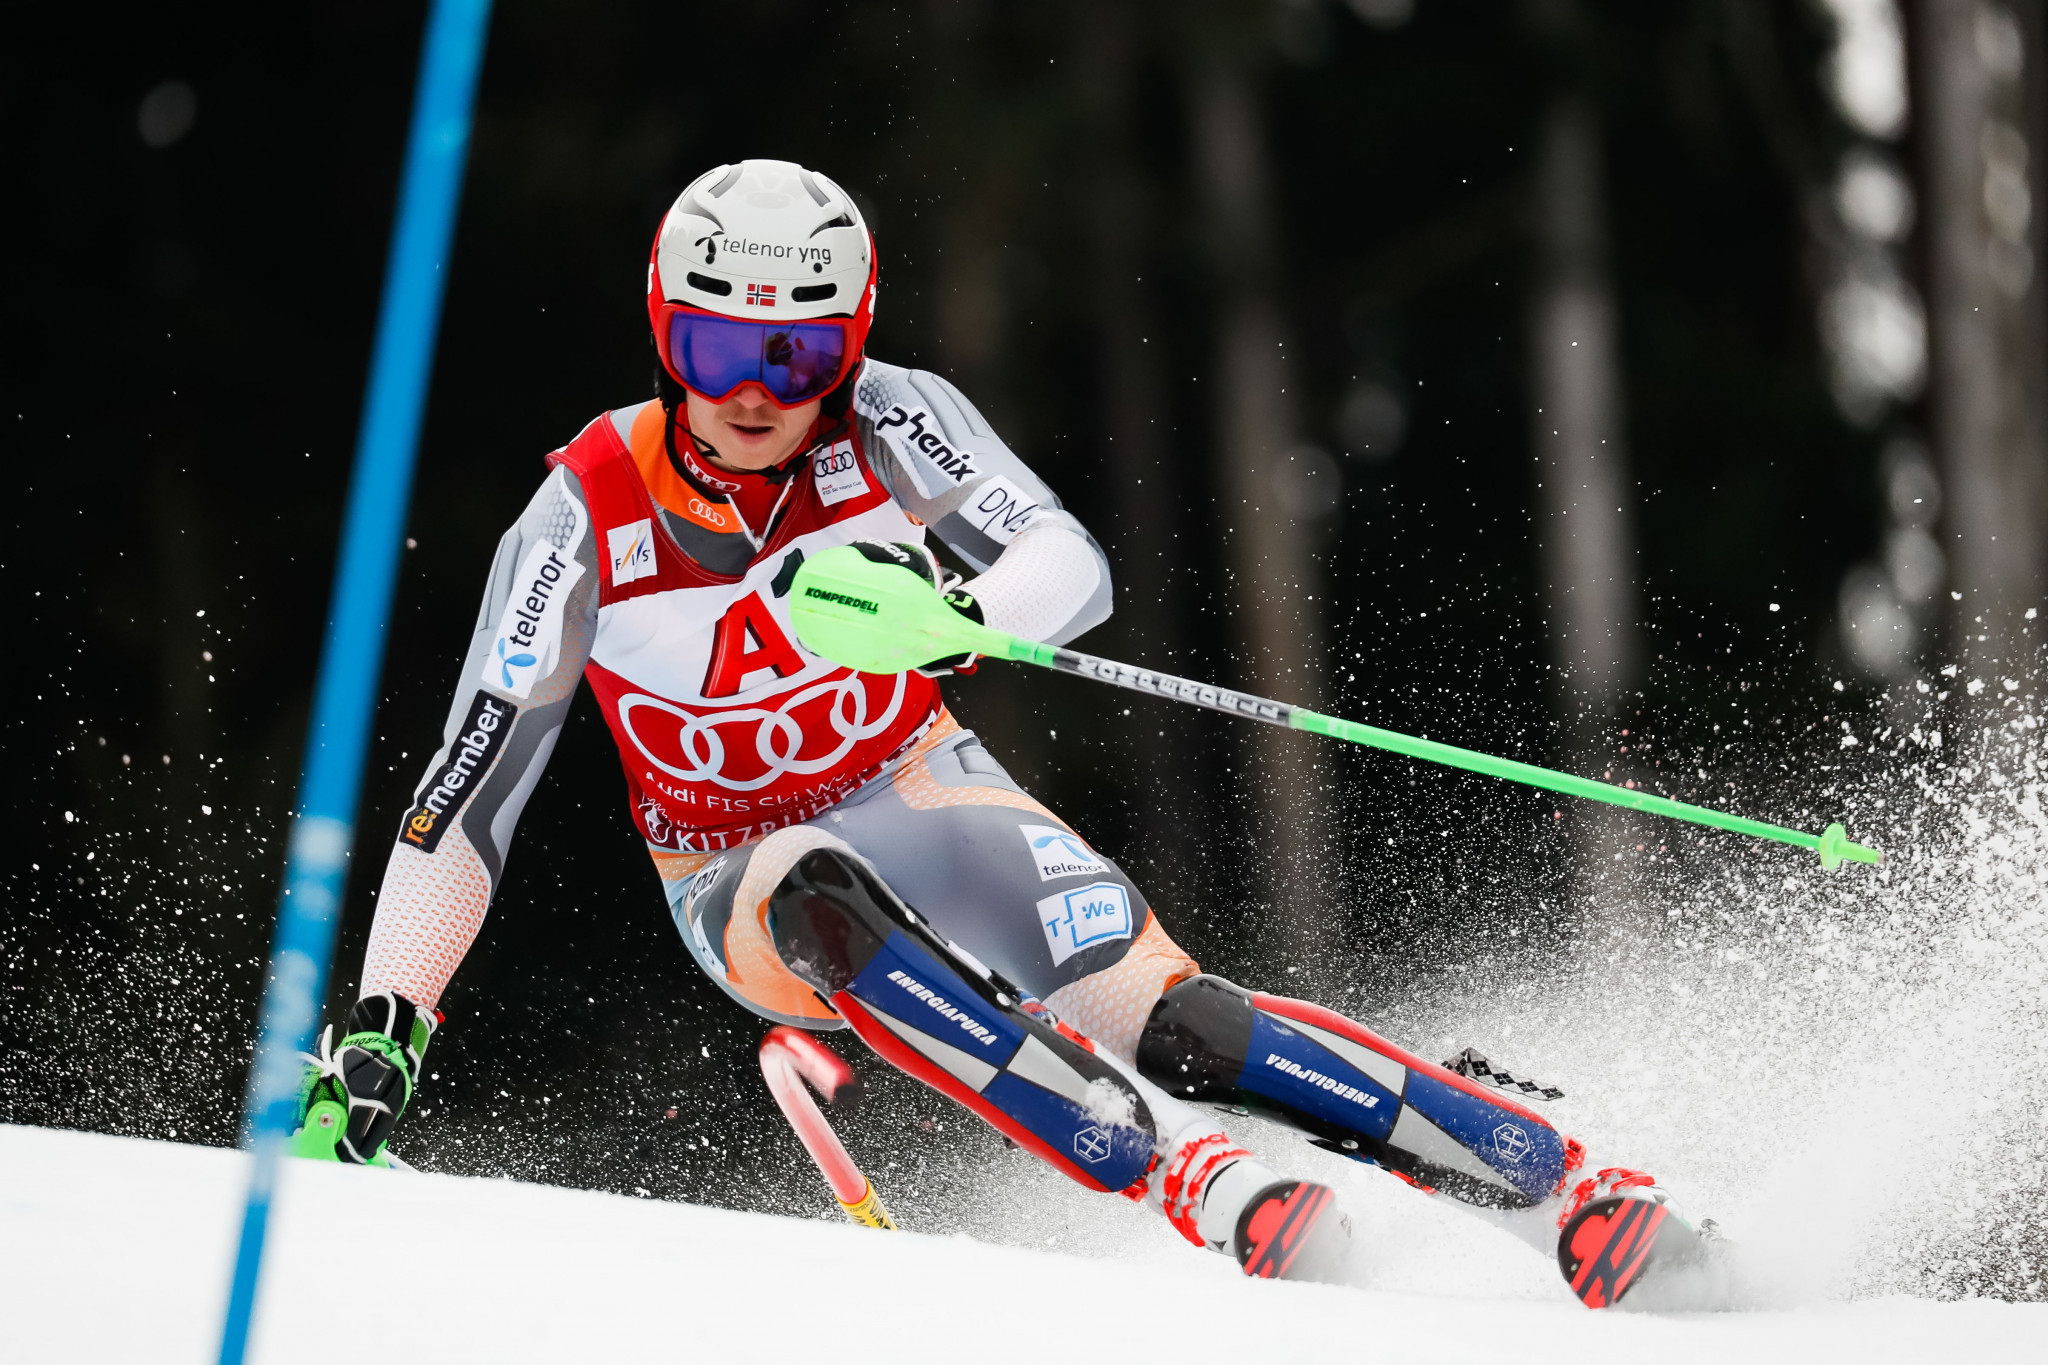 Schladming to host men's slalom event as FIS Alpine Skiing World Cup continues